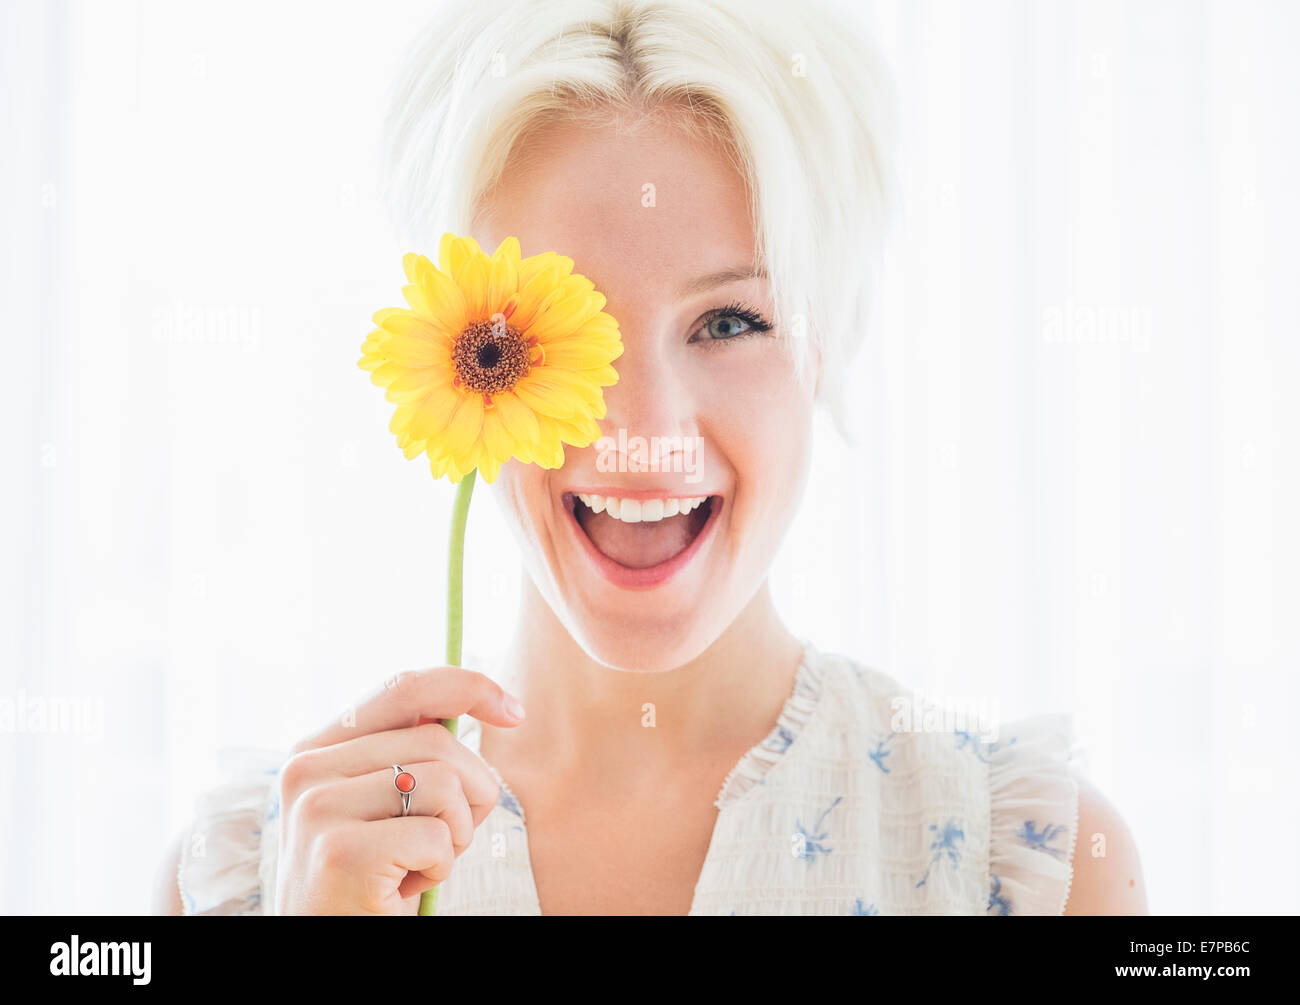 Portrait of blonde woman holding yellow flower Stock Photo